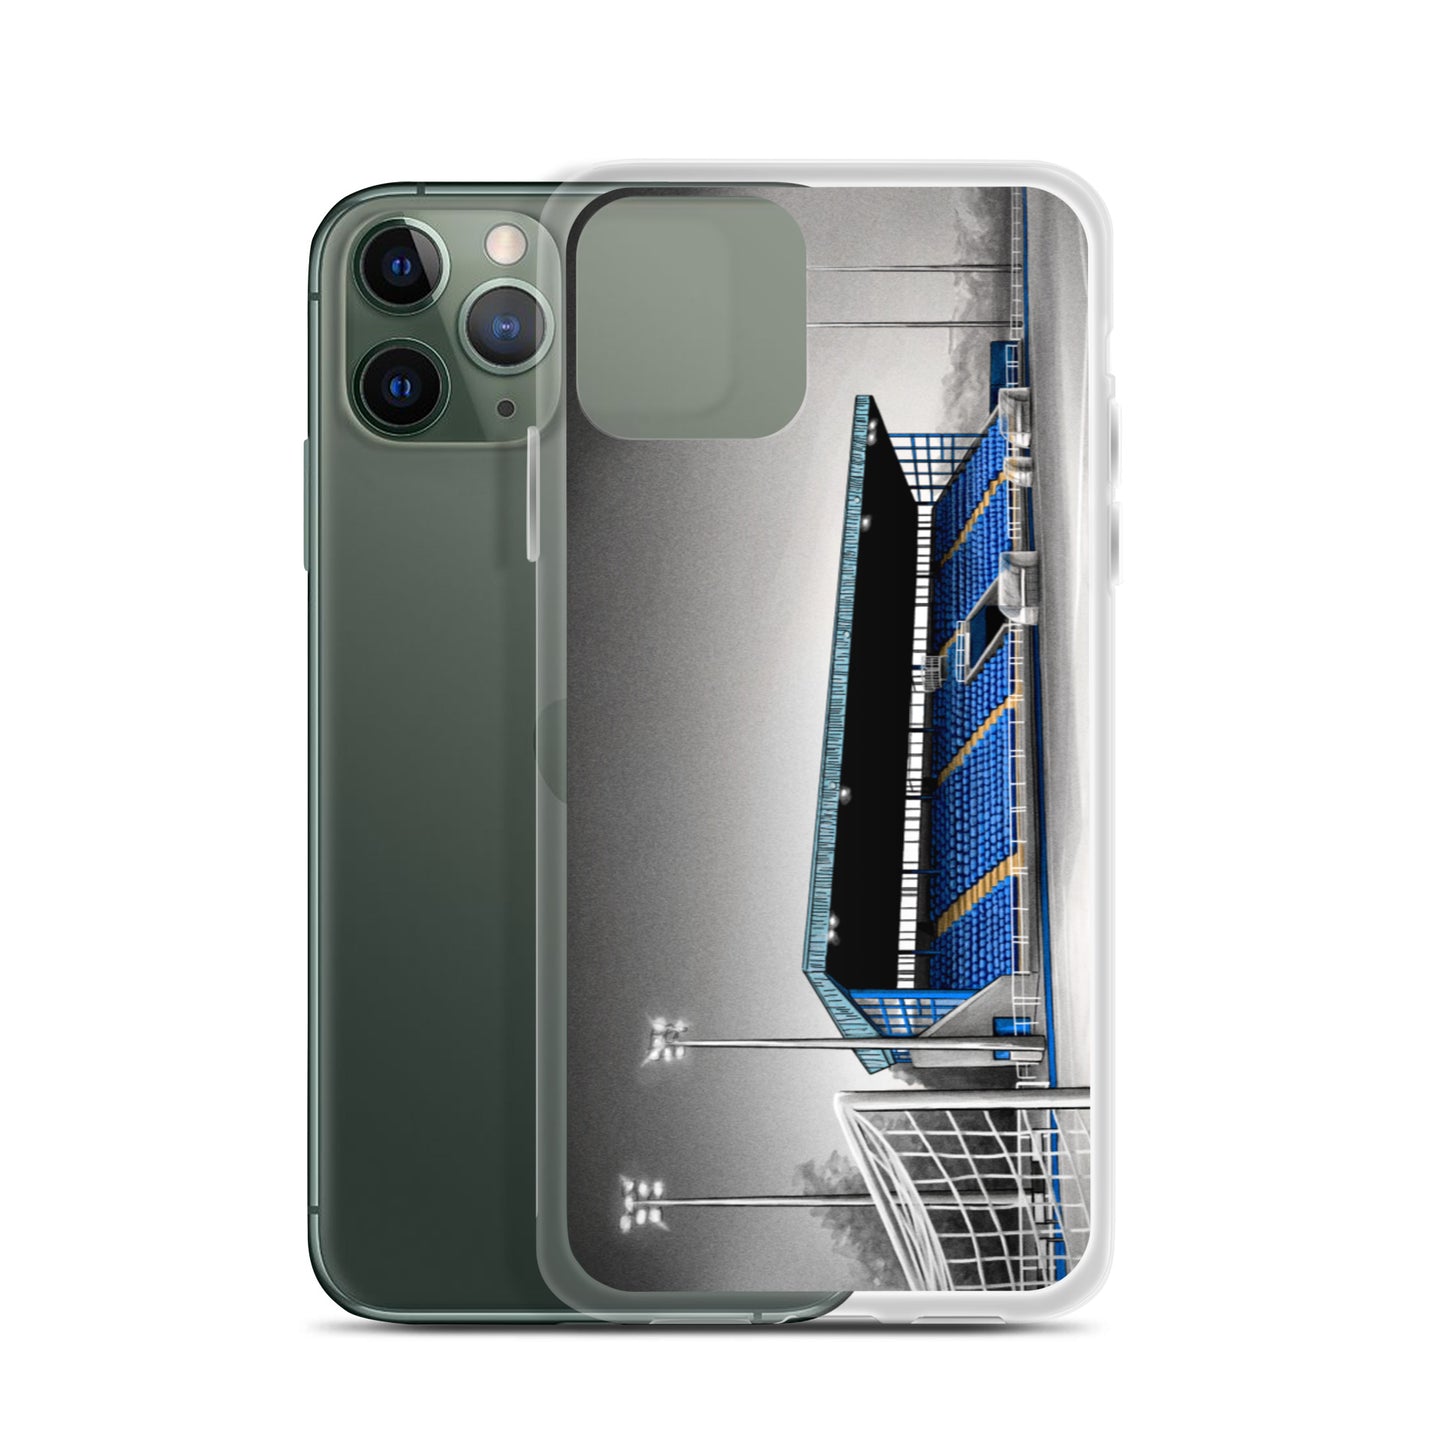 The RSC Waterford FC iPhone Case